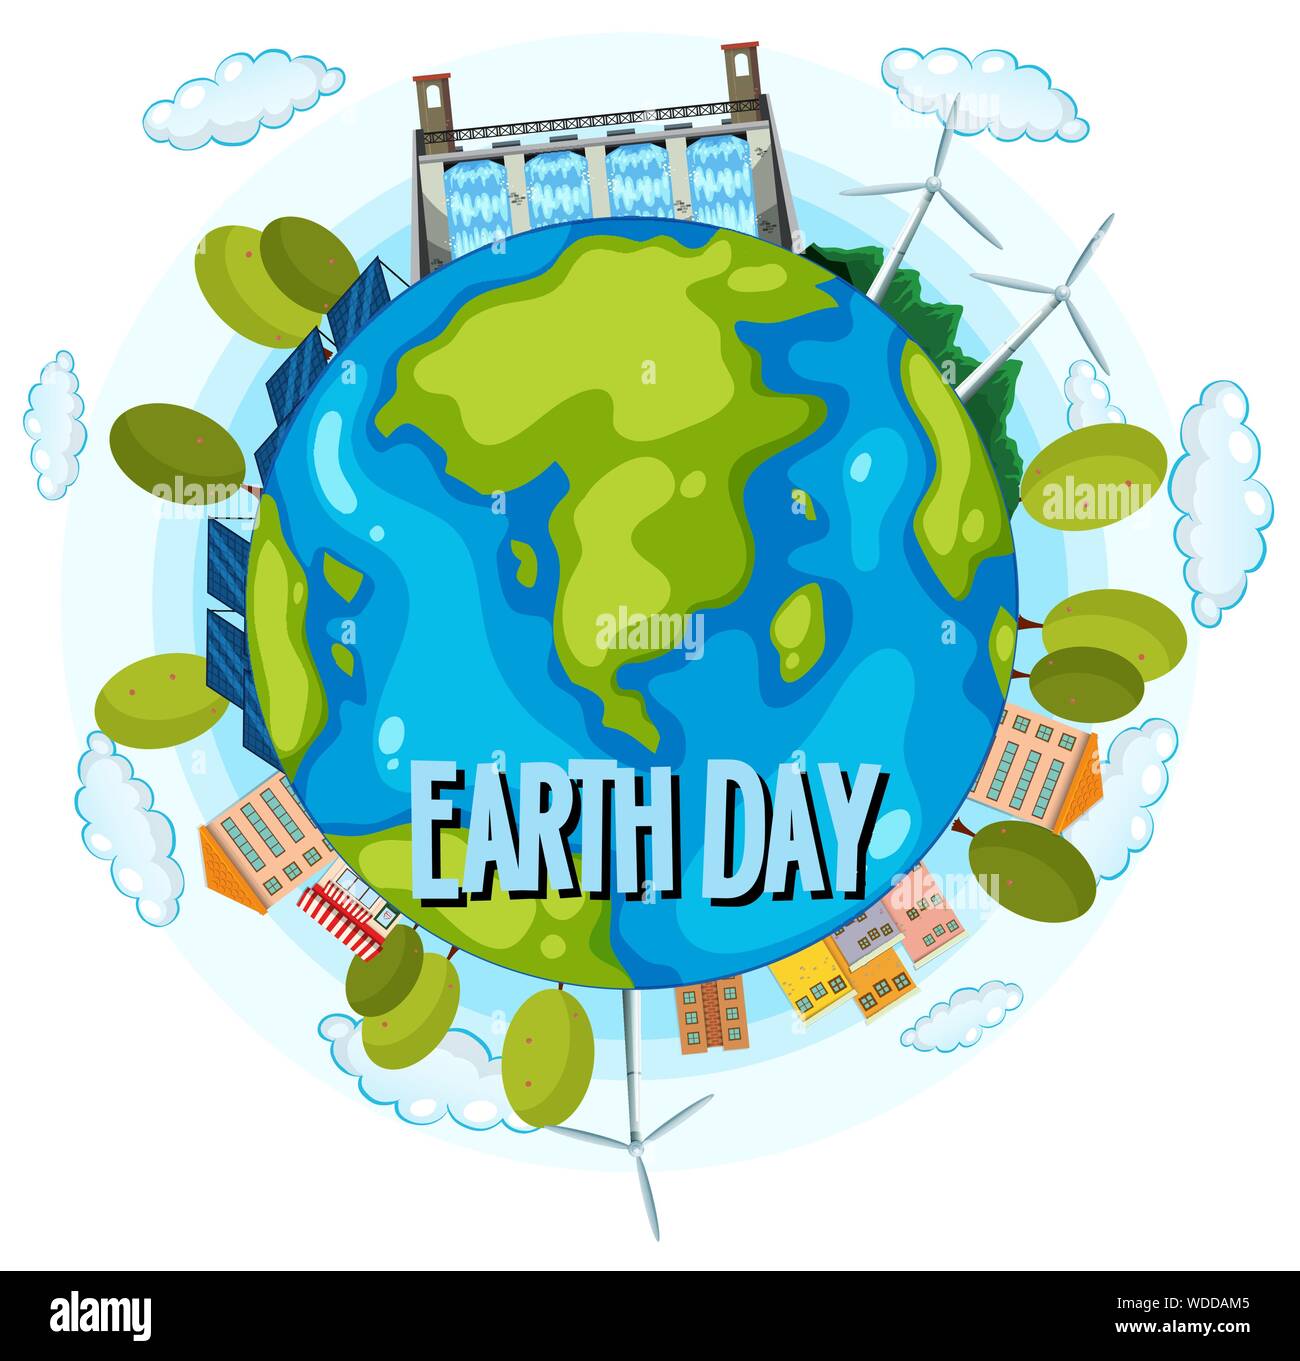 Clean energy earth day poster illustration Stock Vector